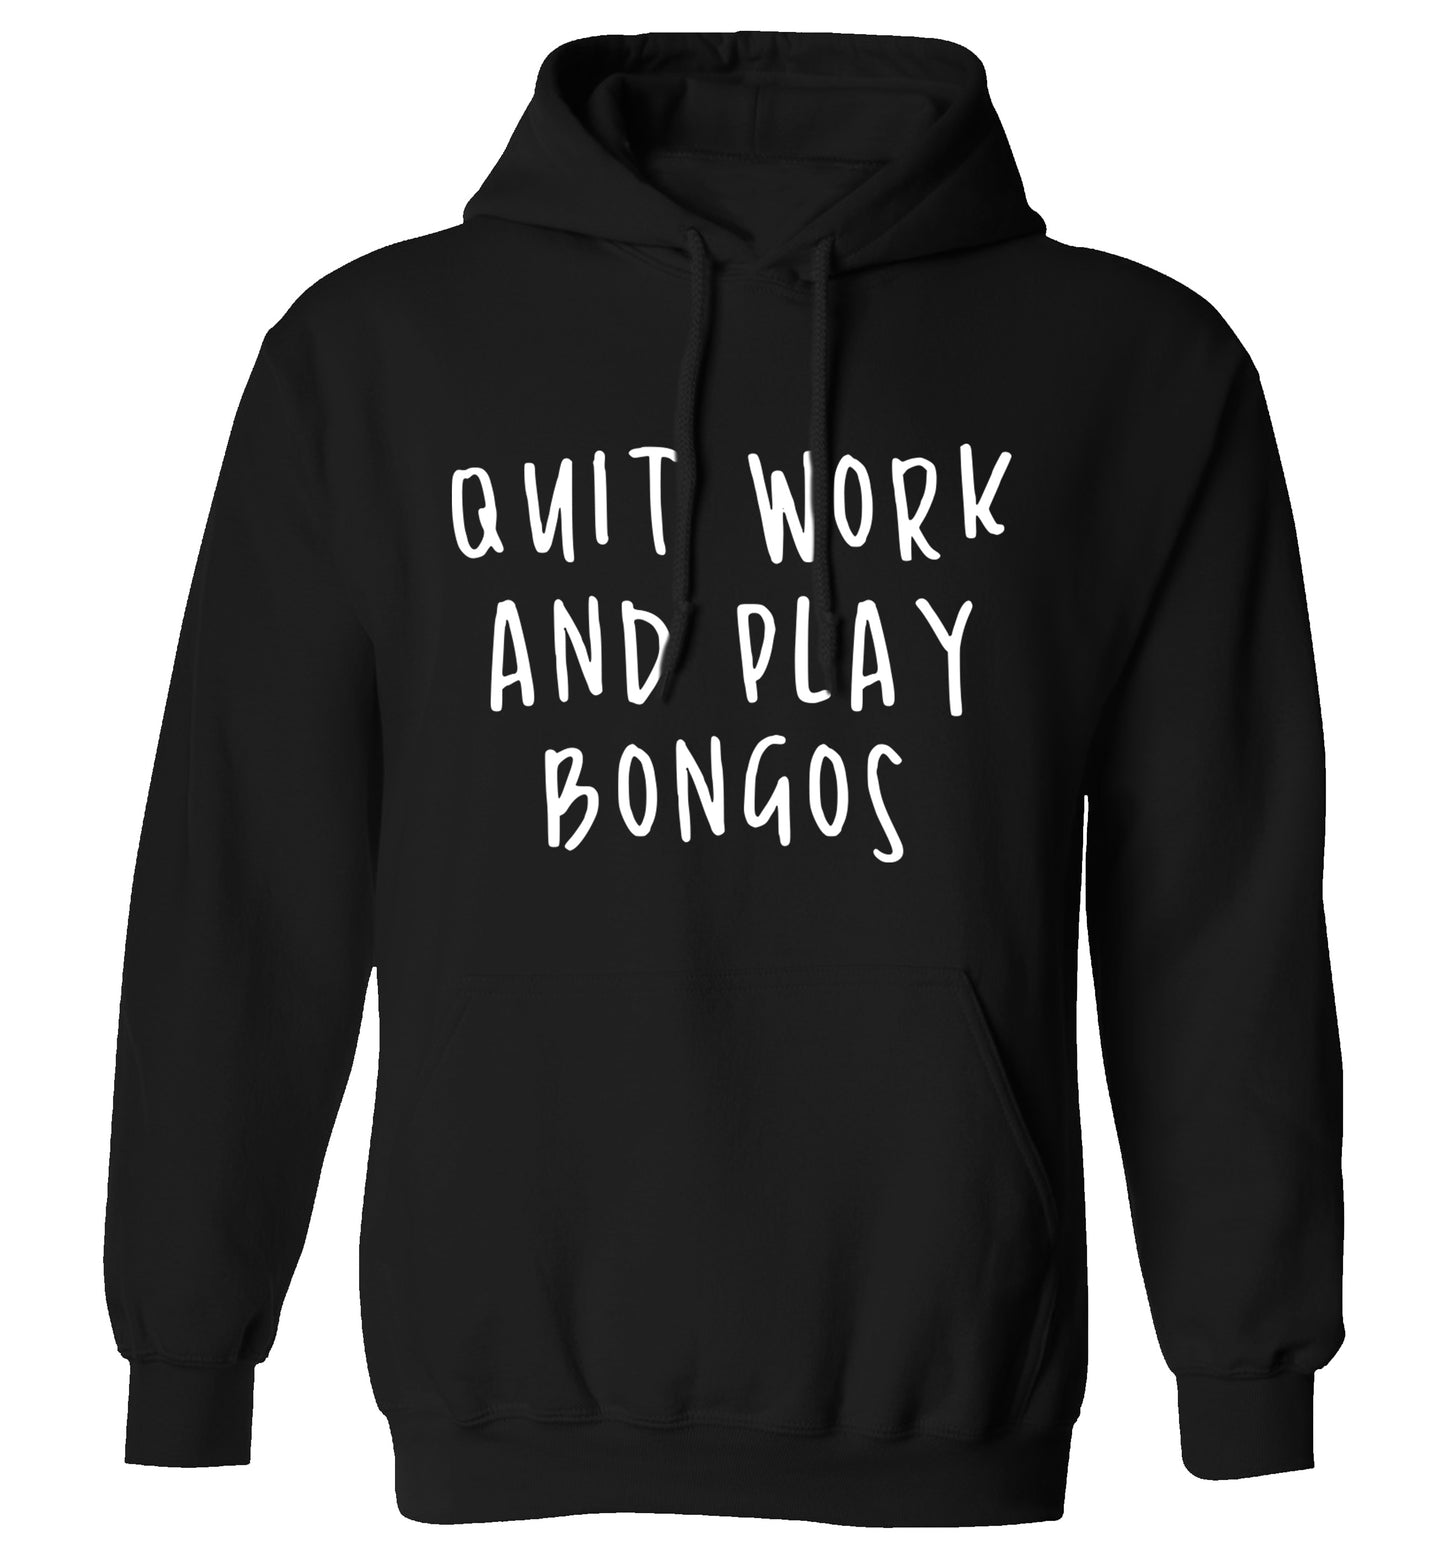 Quit work and play bongos adults unisex black hoodie 2XL